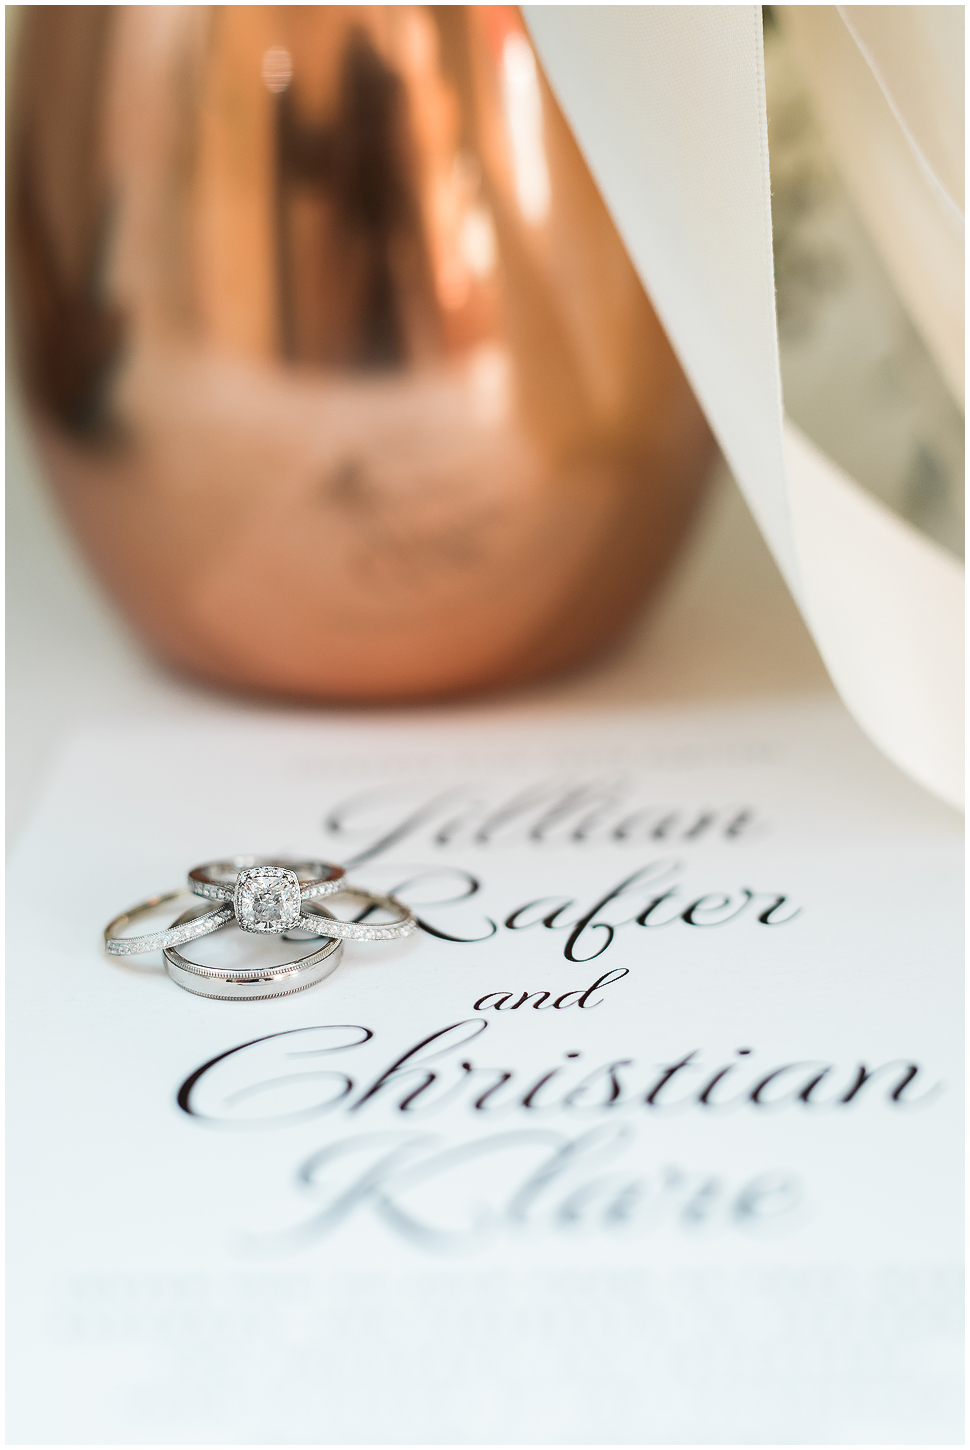 Alyson's Orchard Wedding- Simple white invitations with platinum and diamond wedding rings on it. 